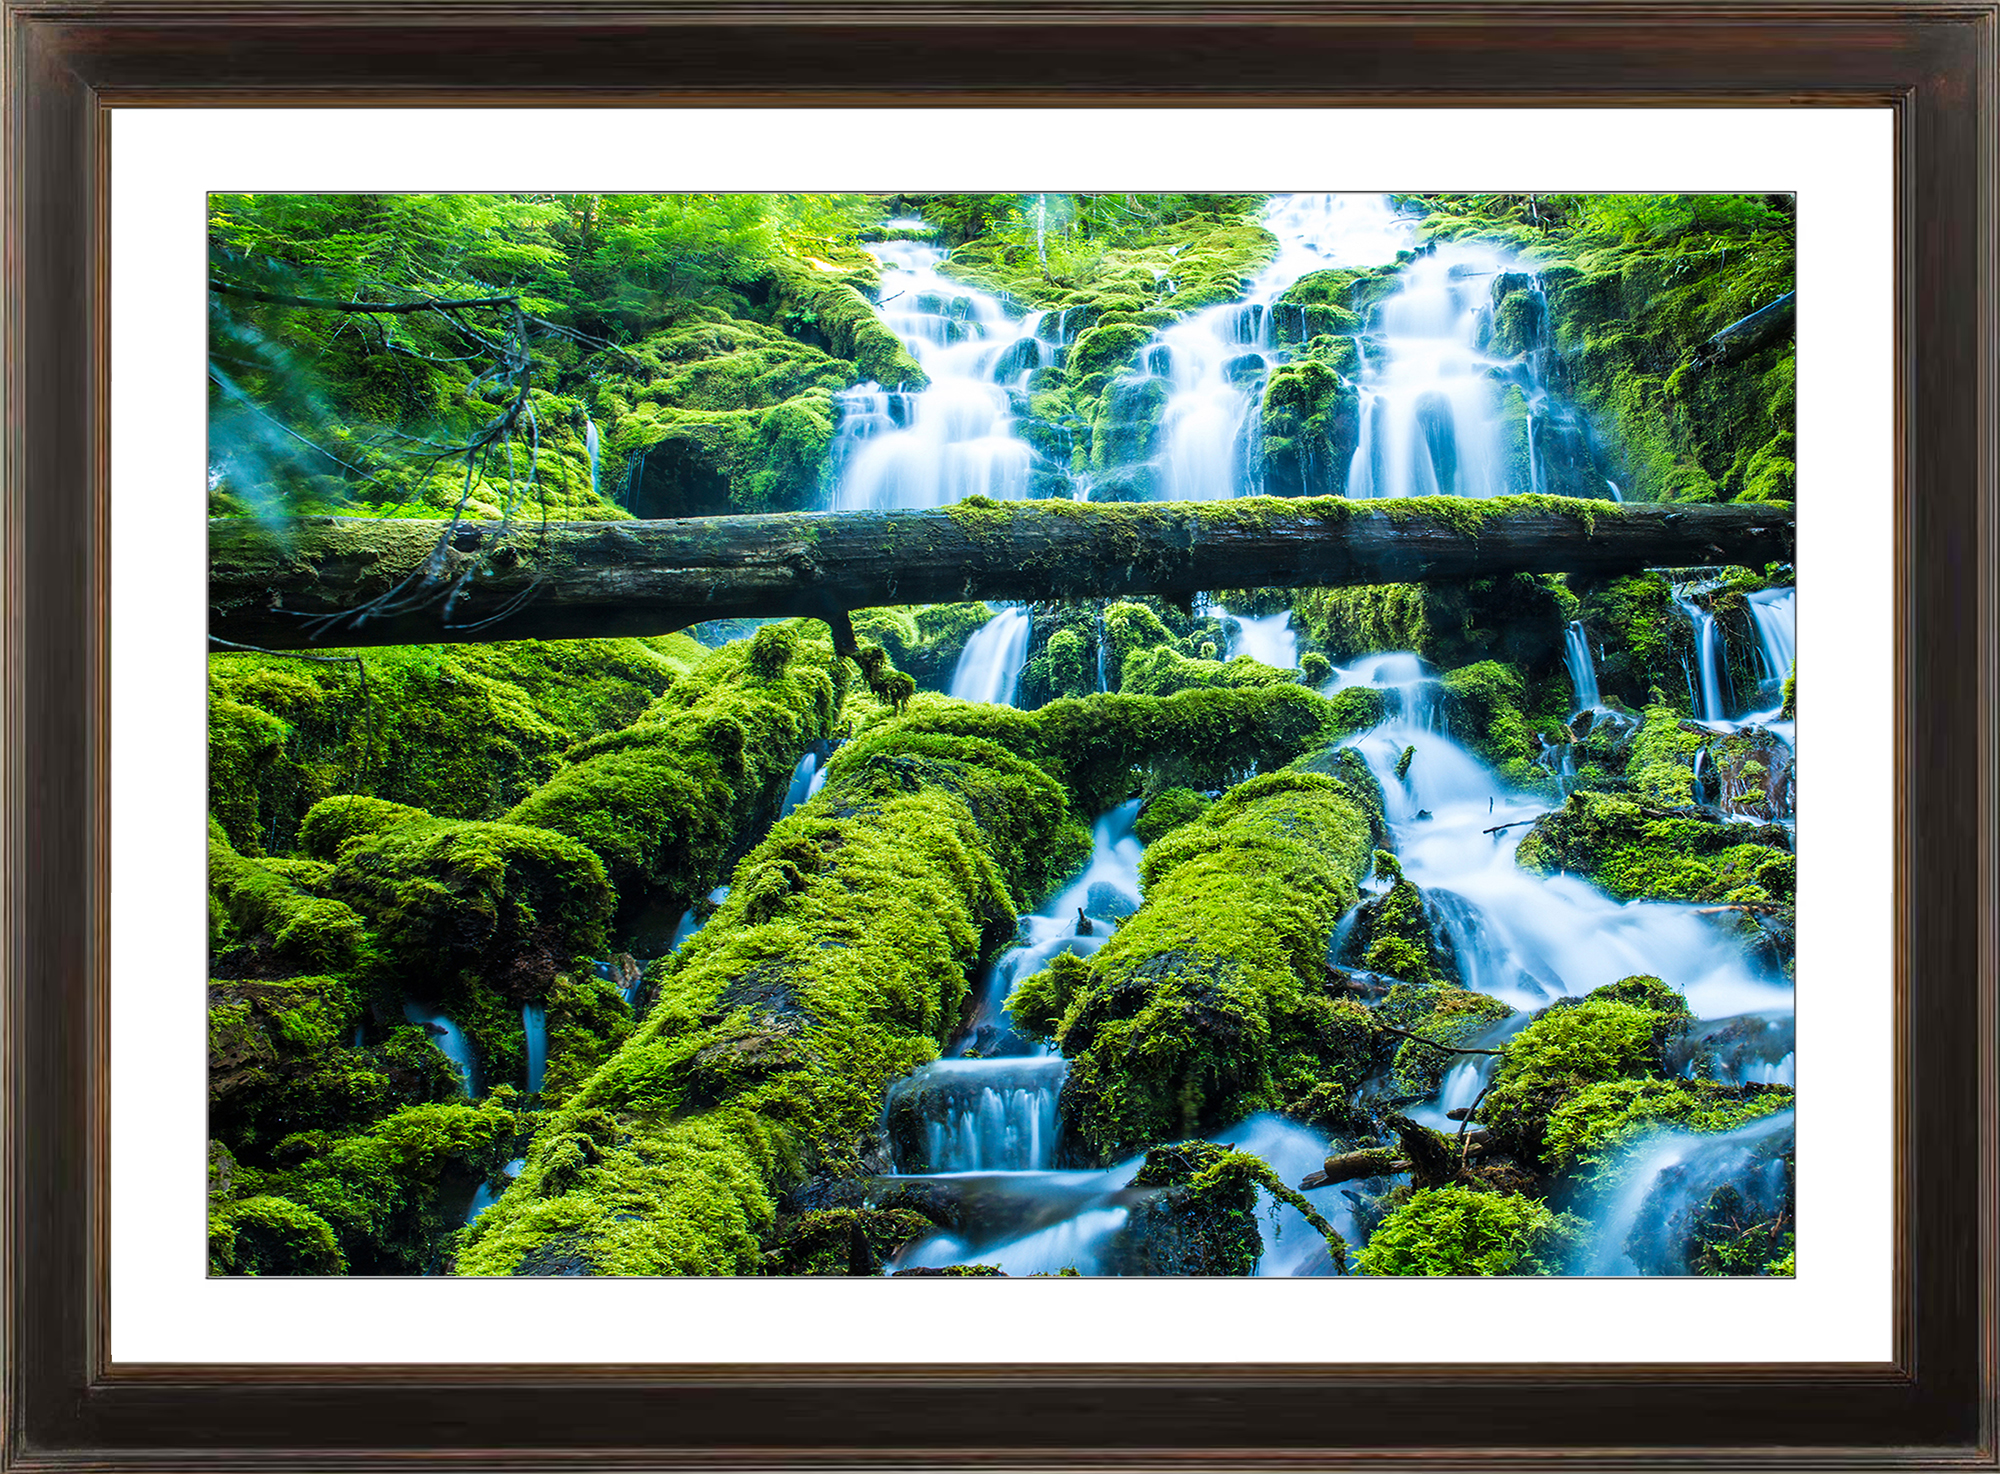 Framed Print of a Waterfall in Oregon